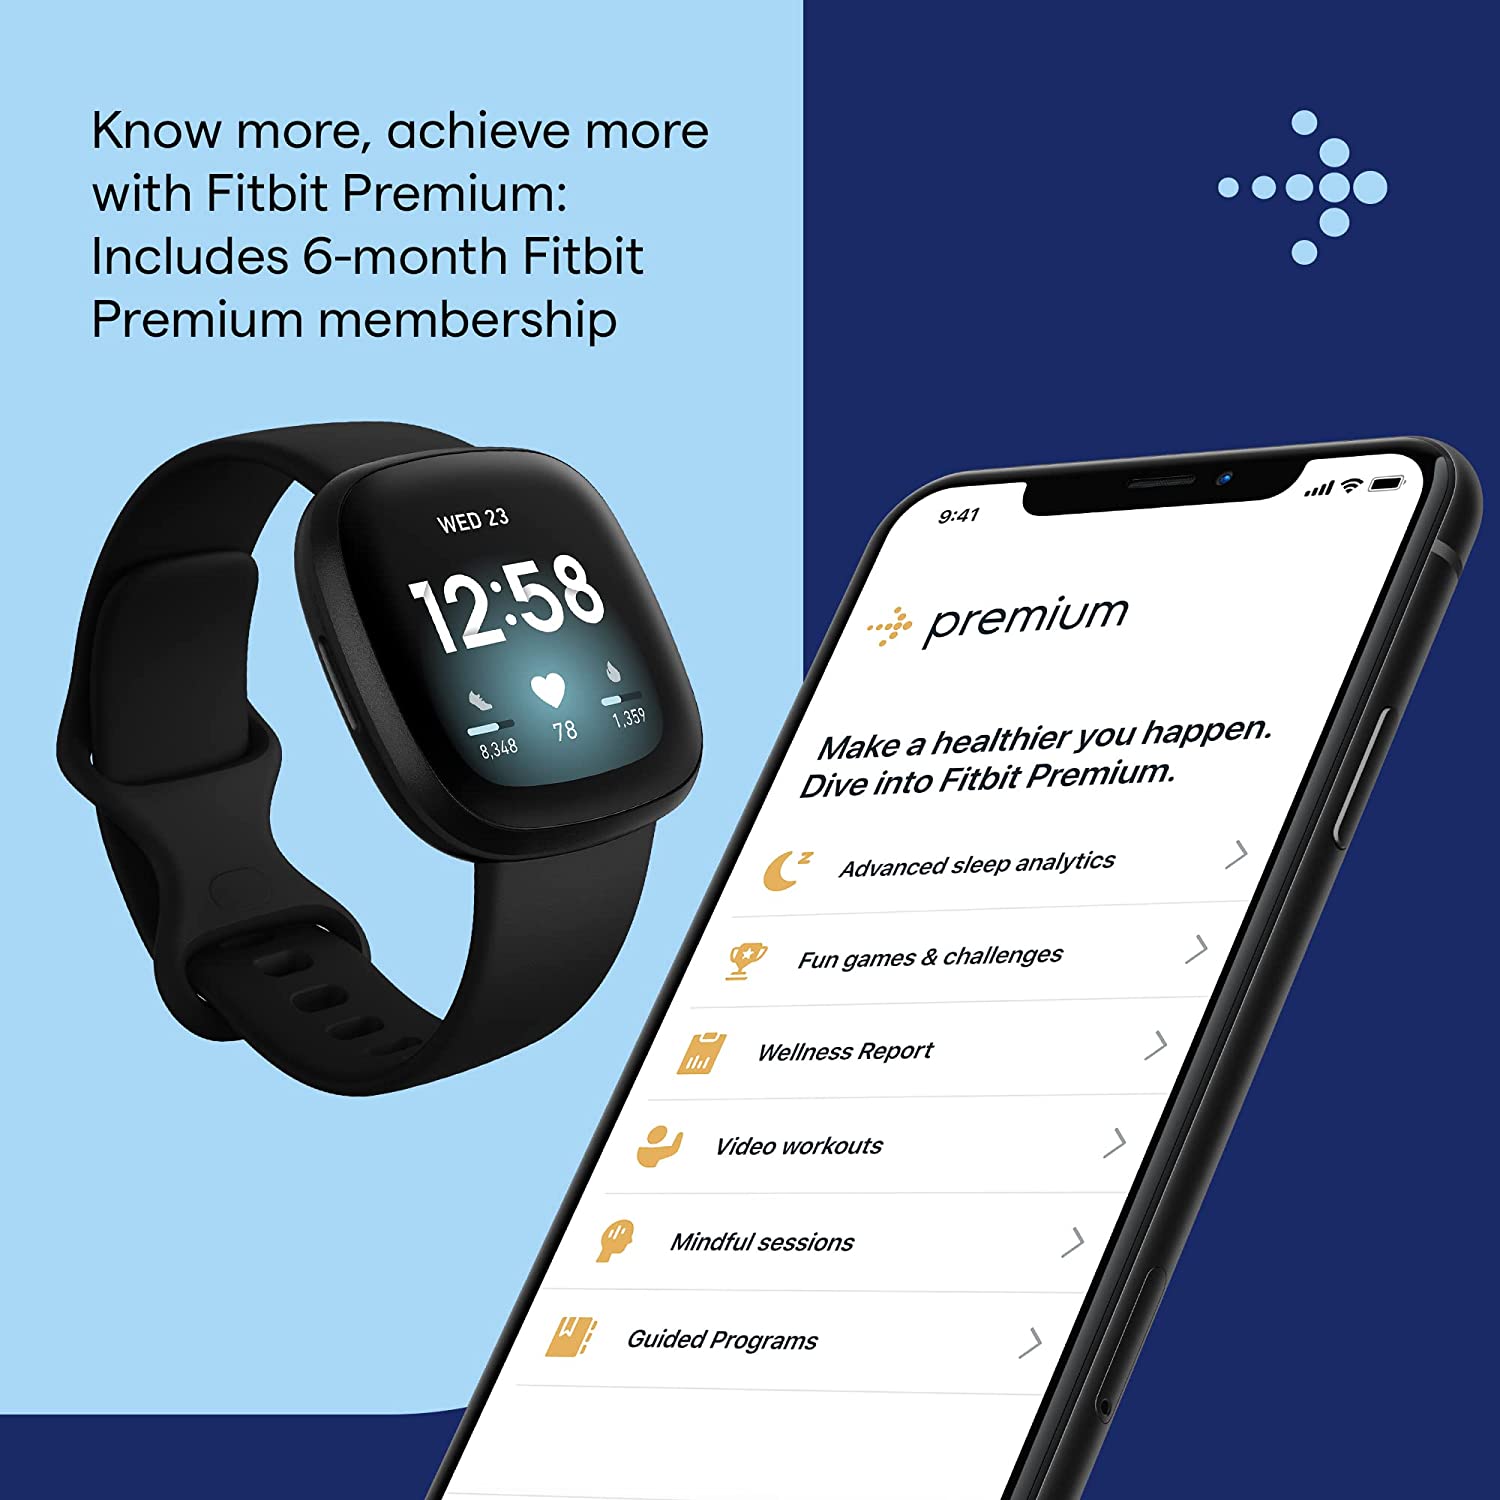 Fitbit Versa 3 Health & Fitness Smartwatch with GPS, 24/7 Heart Rate,